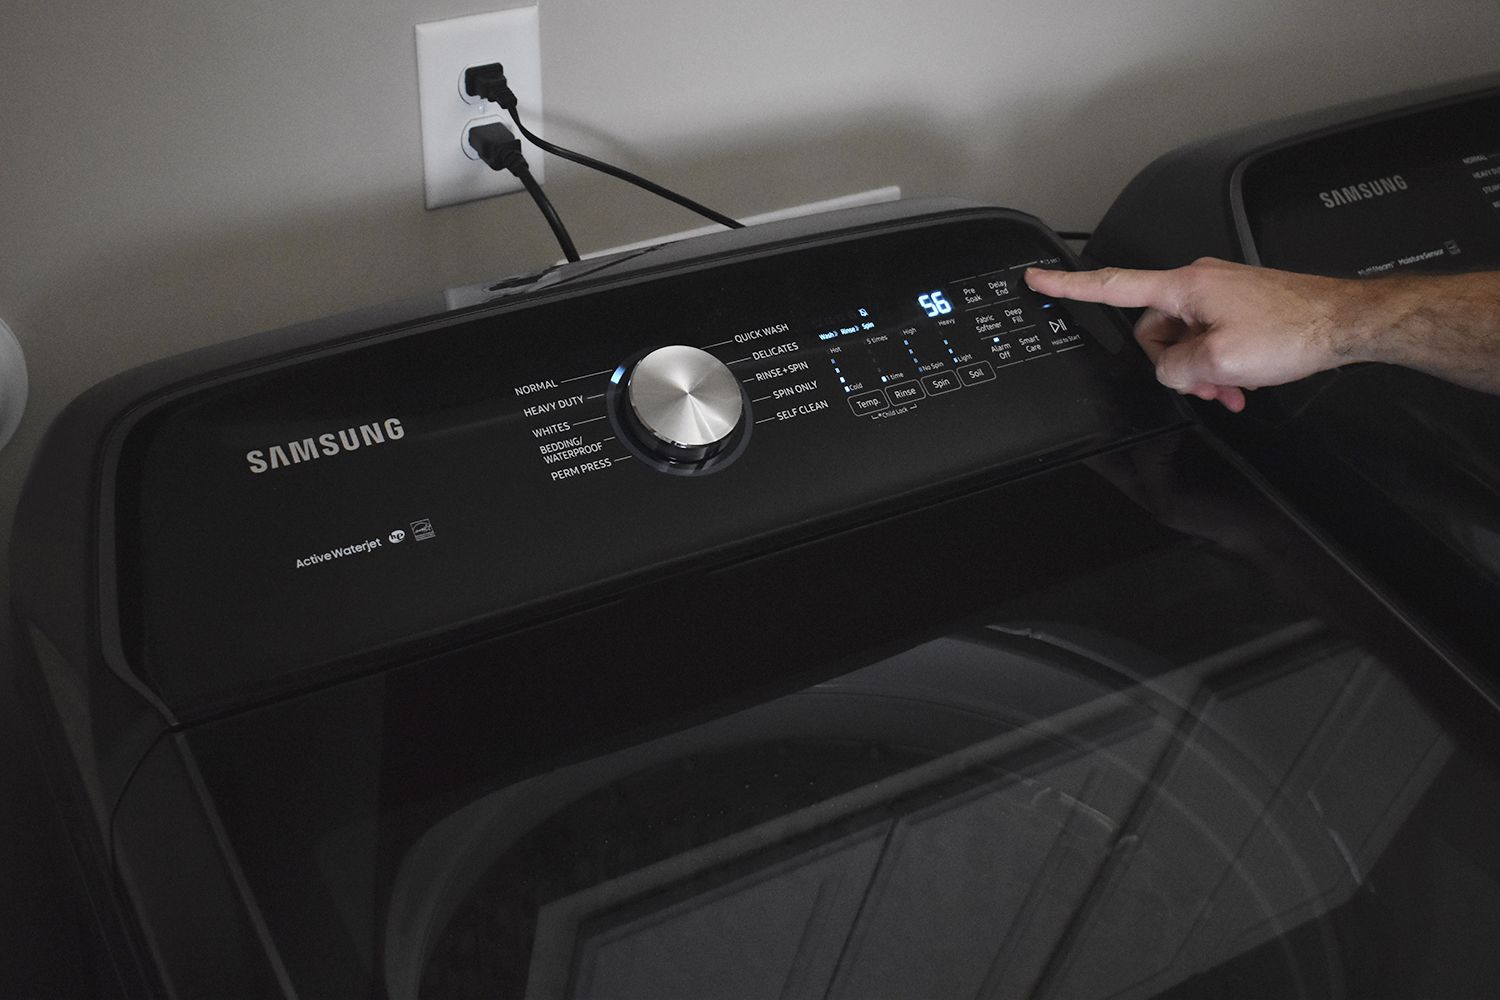 Why Is My Samsung Washer Not Draining